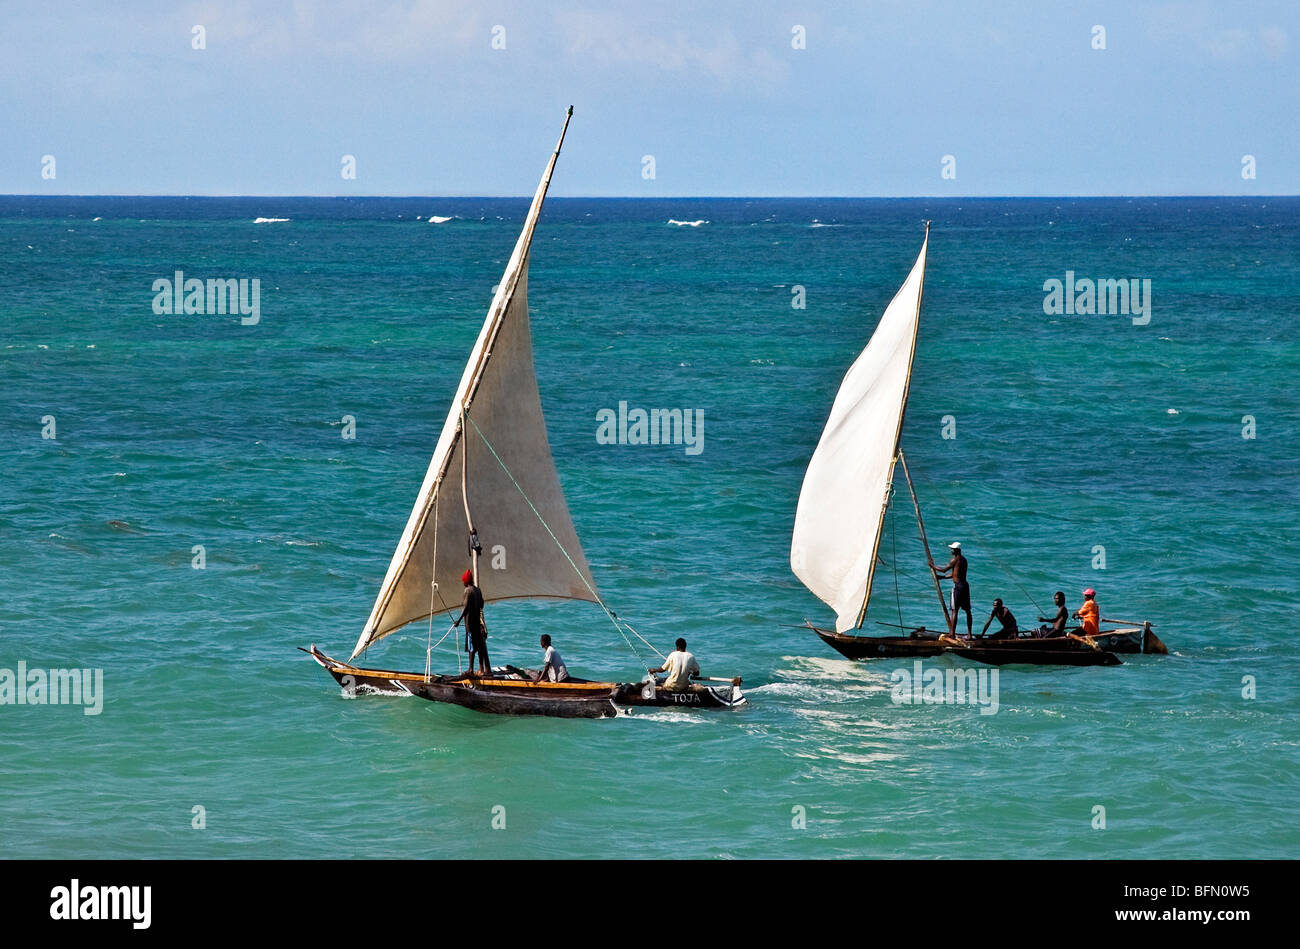 Kenya, Mombasa. Two outrigger canoes sail in the clear waters of the Indian Ocean, off Diani Beach. Stock Photo